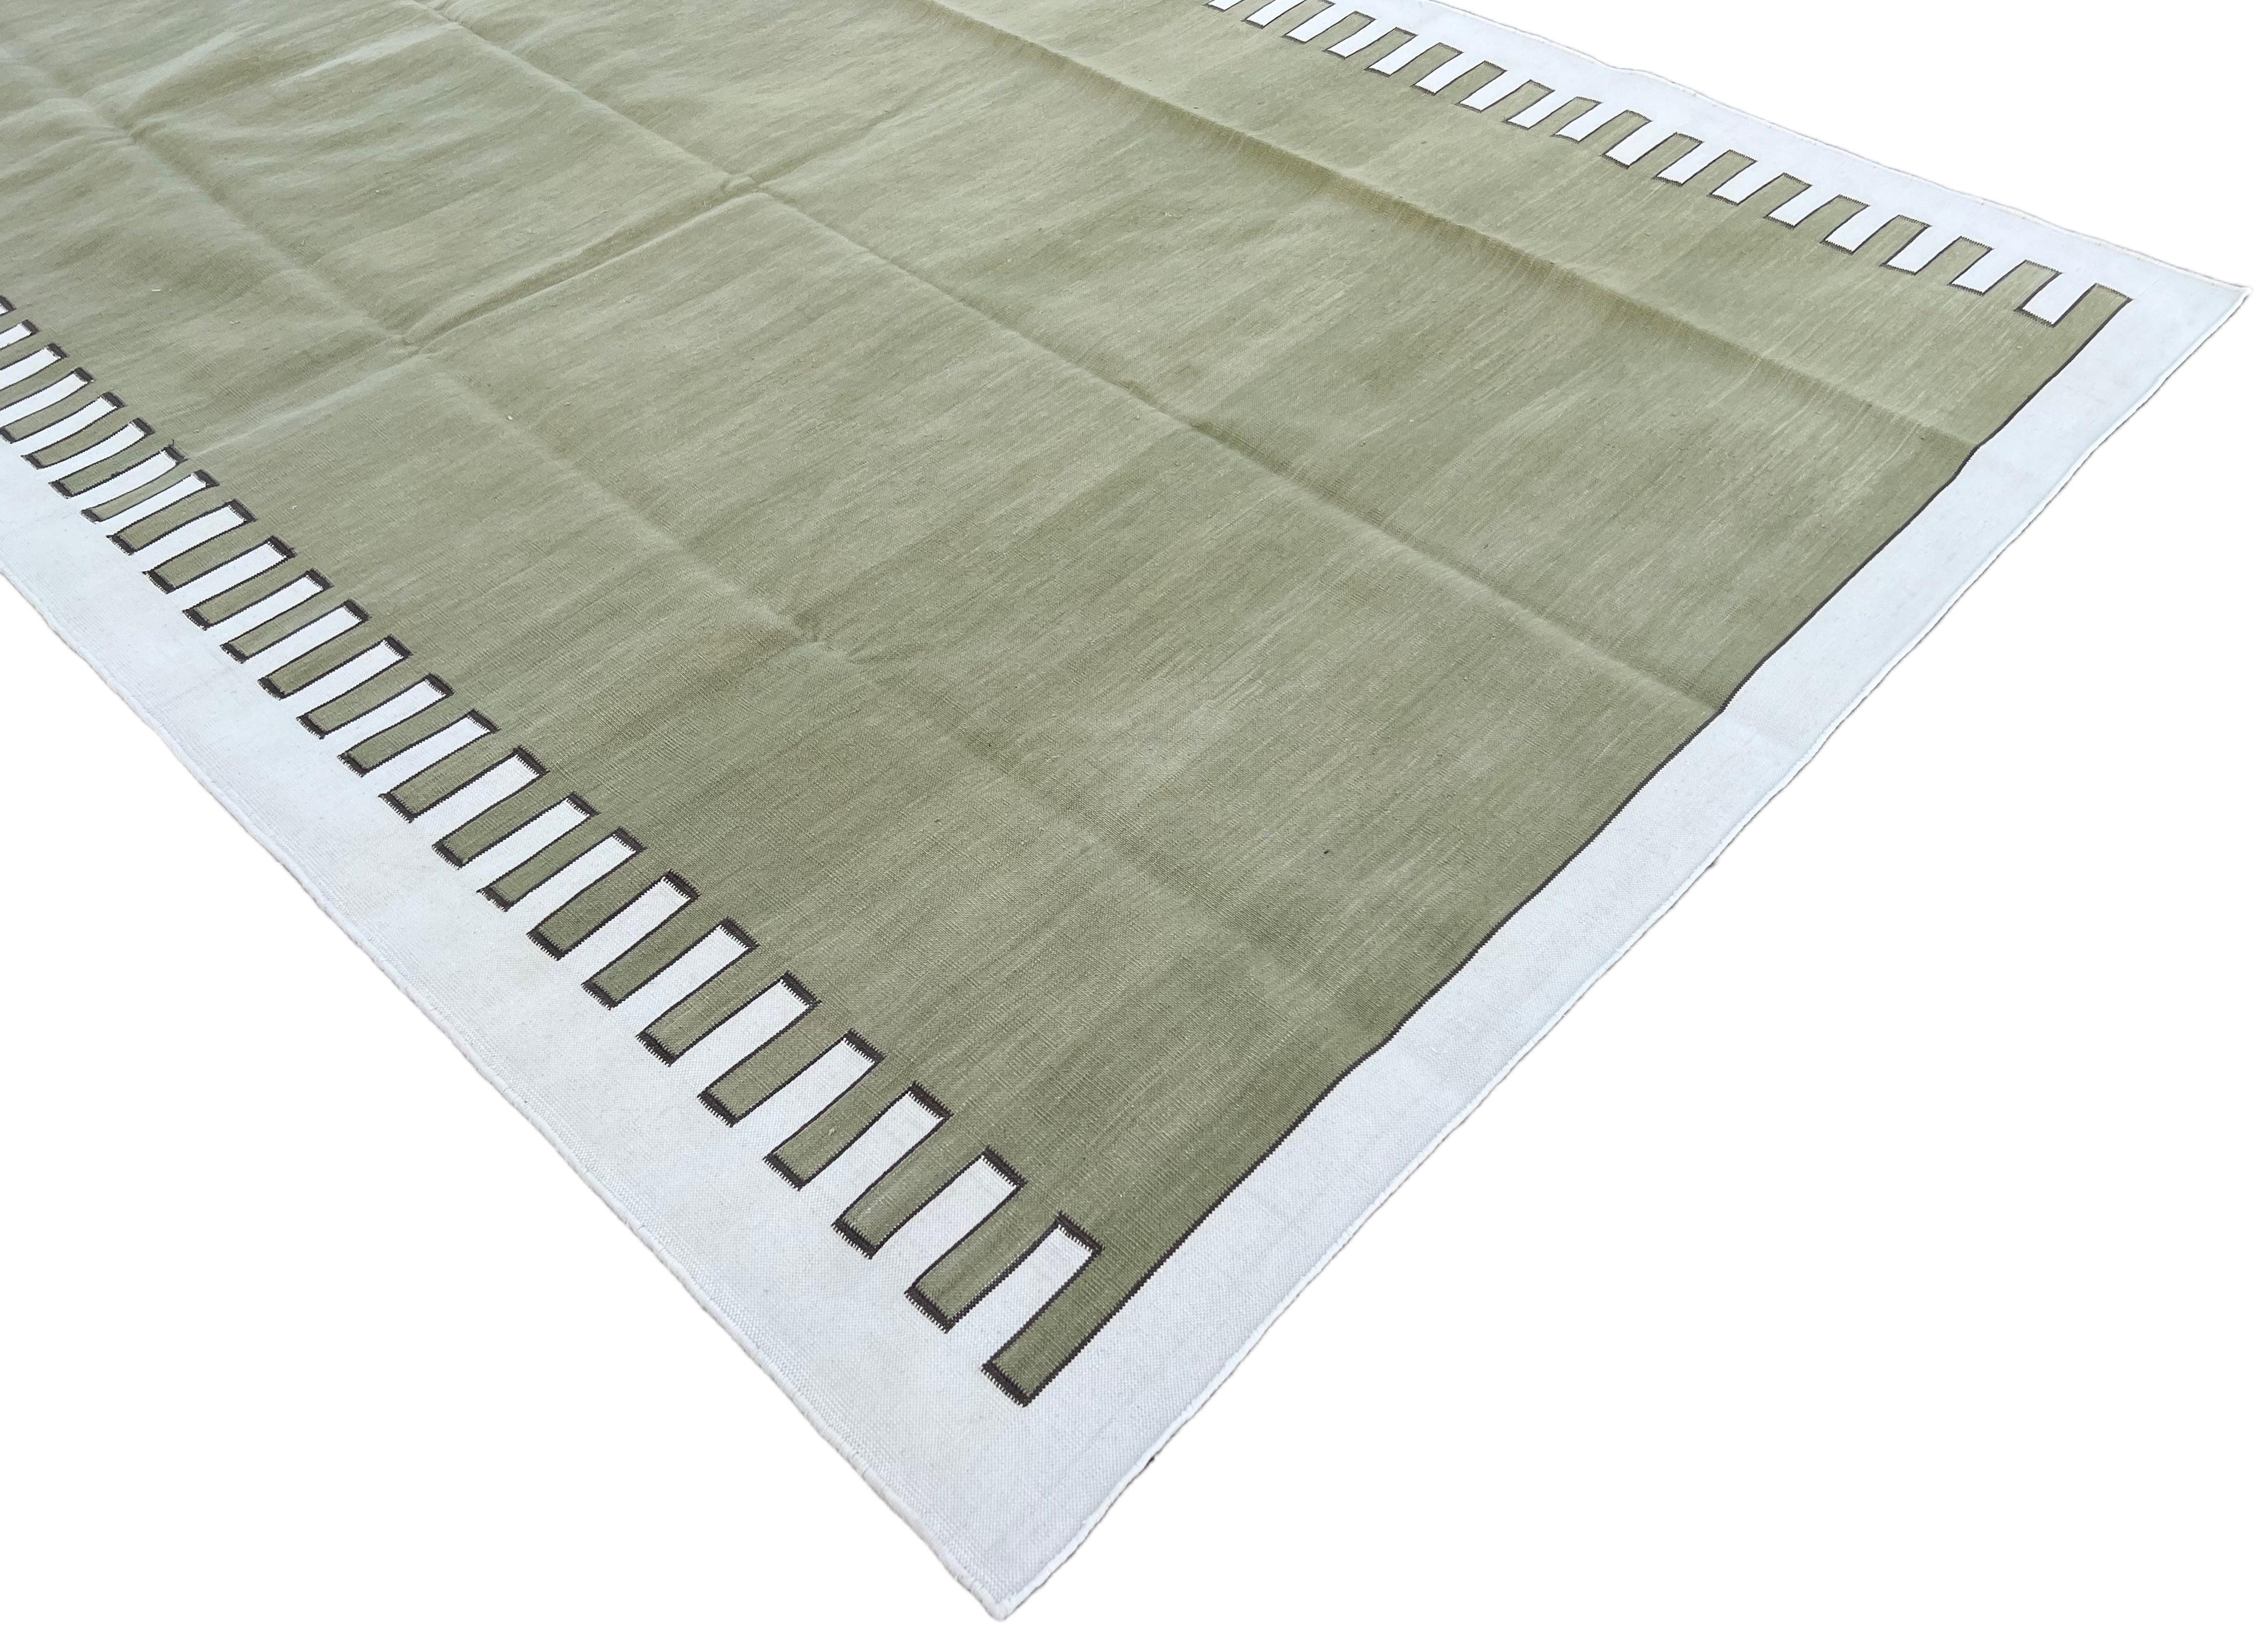 Hand-Woven Handmade Cotton Area Flat Weave Rug, Olive Green & Cream Zig Zag Striped Dhurrie For Sale